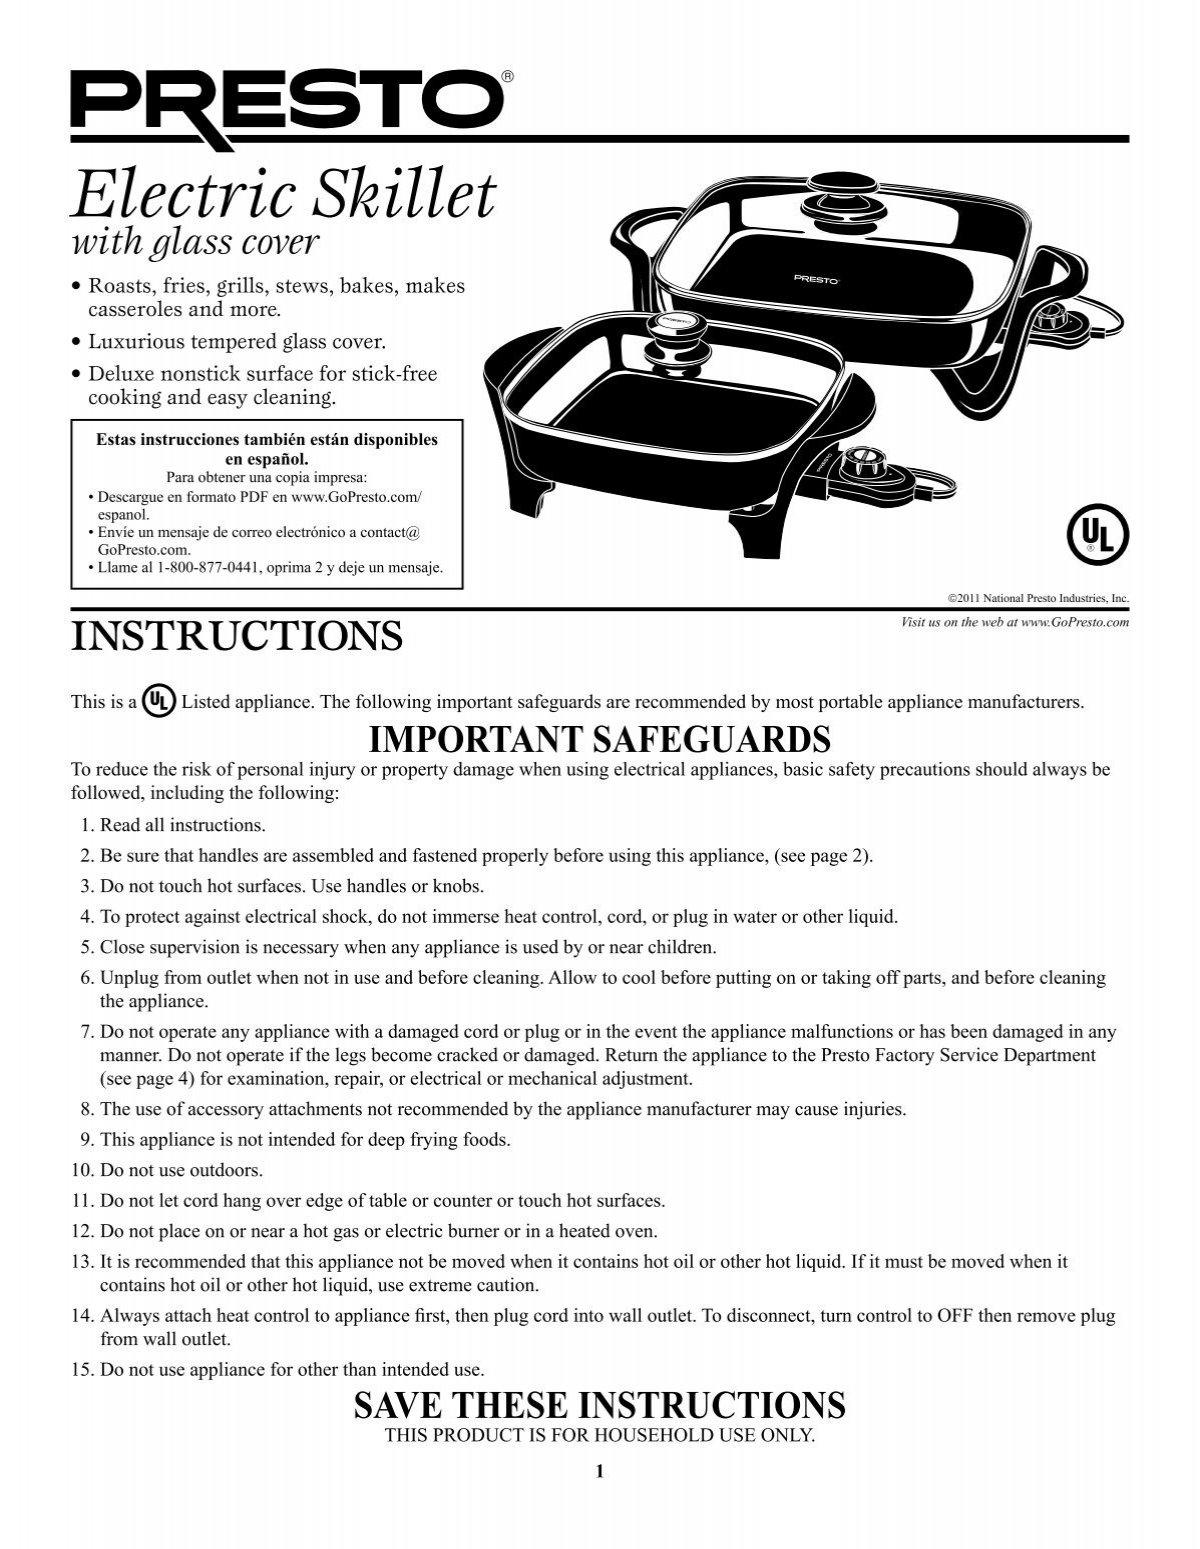 How To Clean And Replace Presto Electric Skillet Cover Assembly